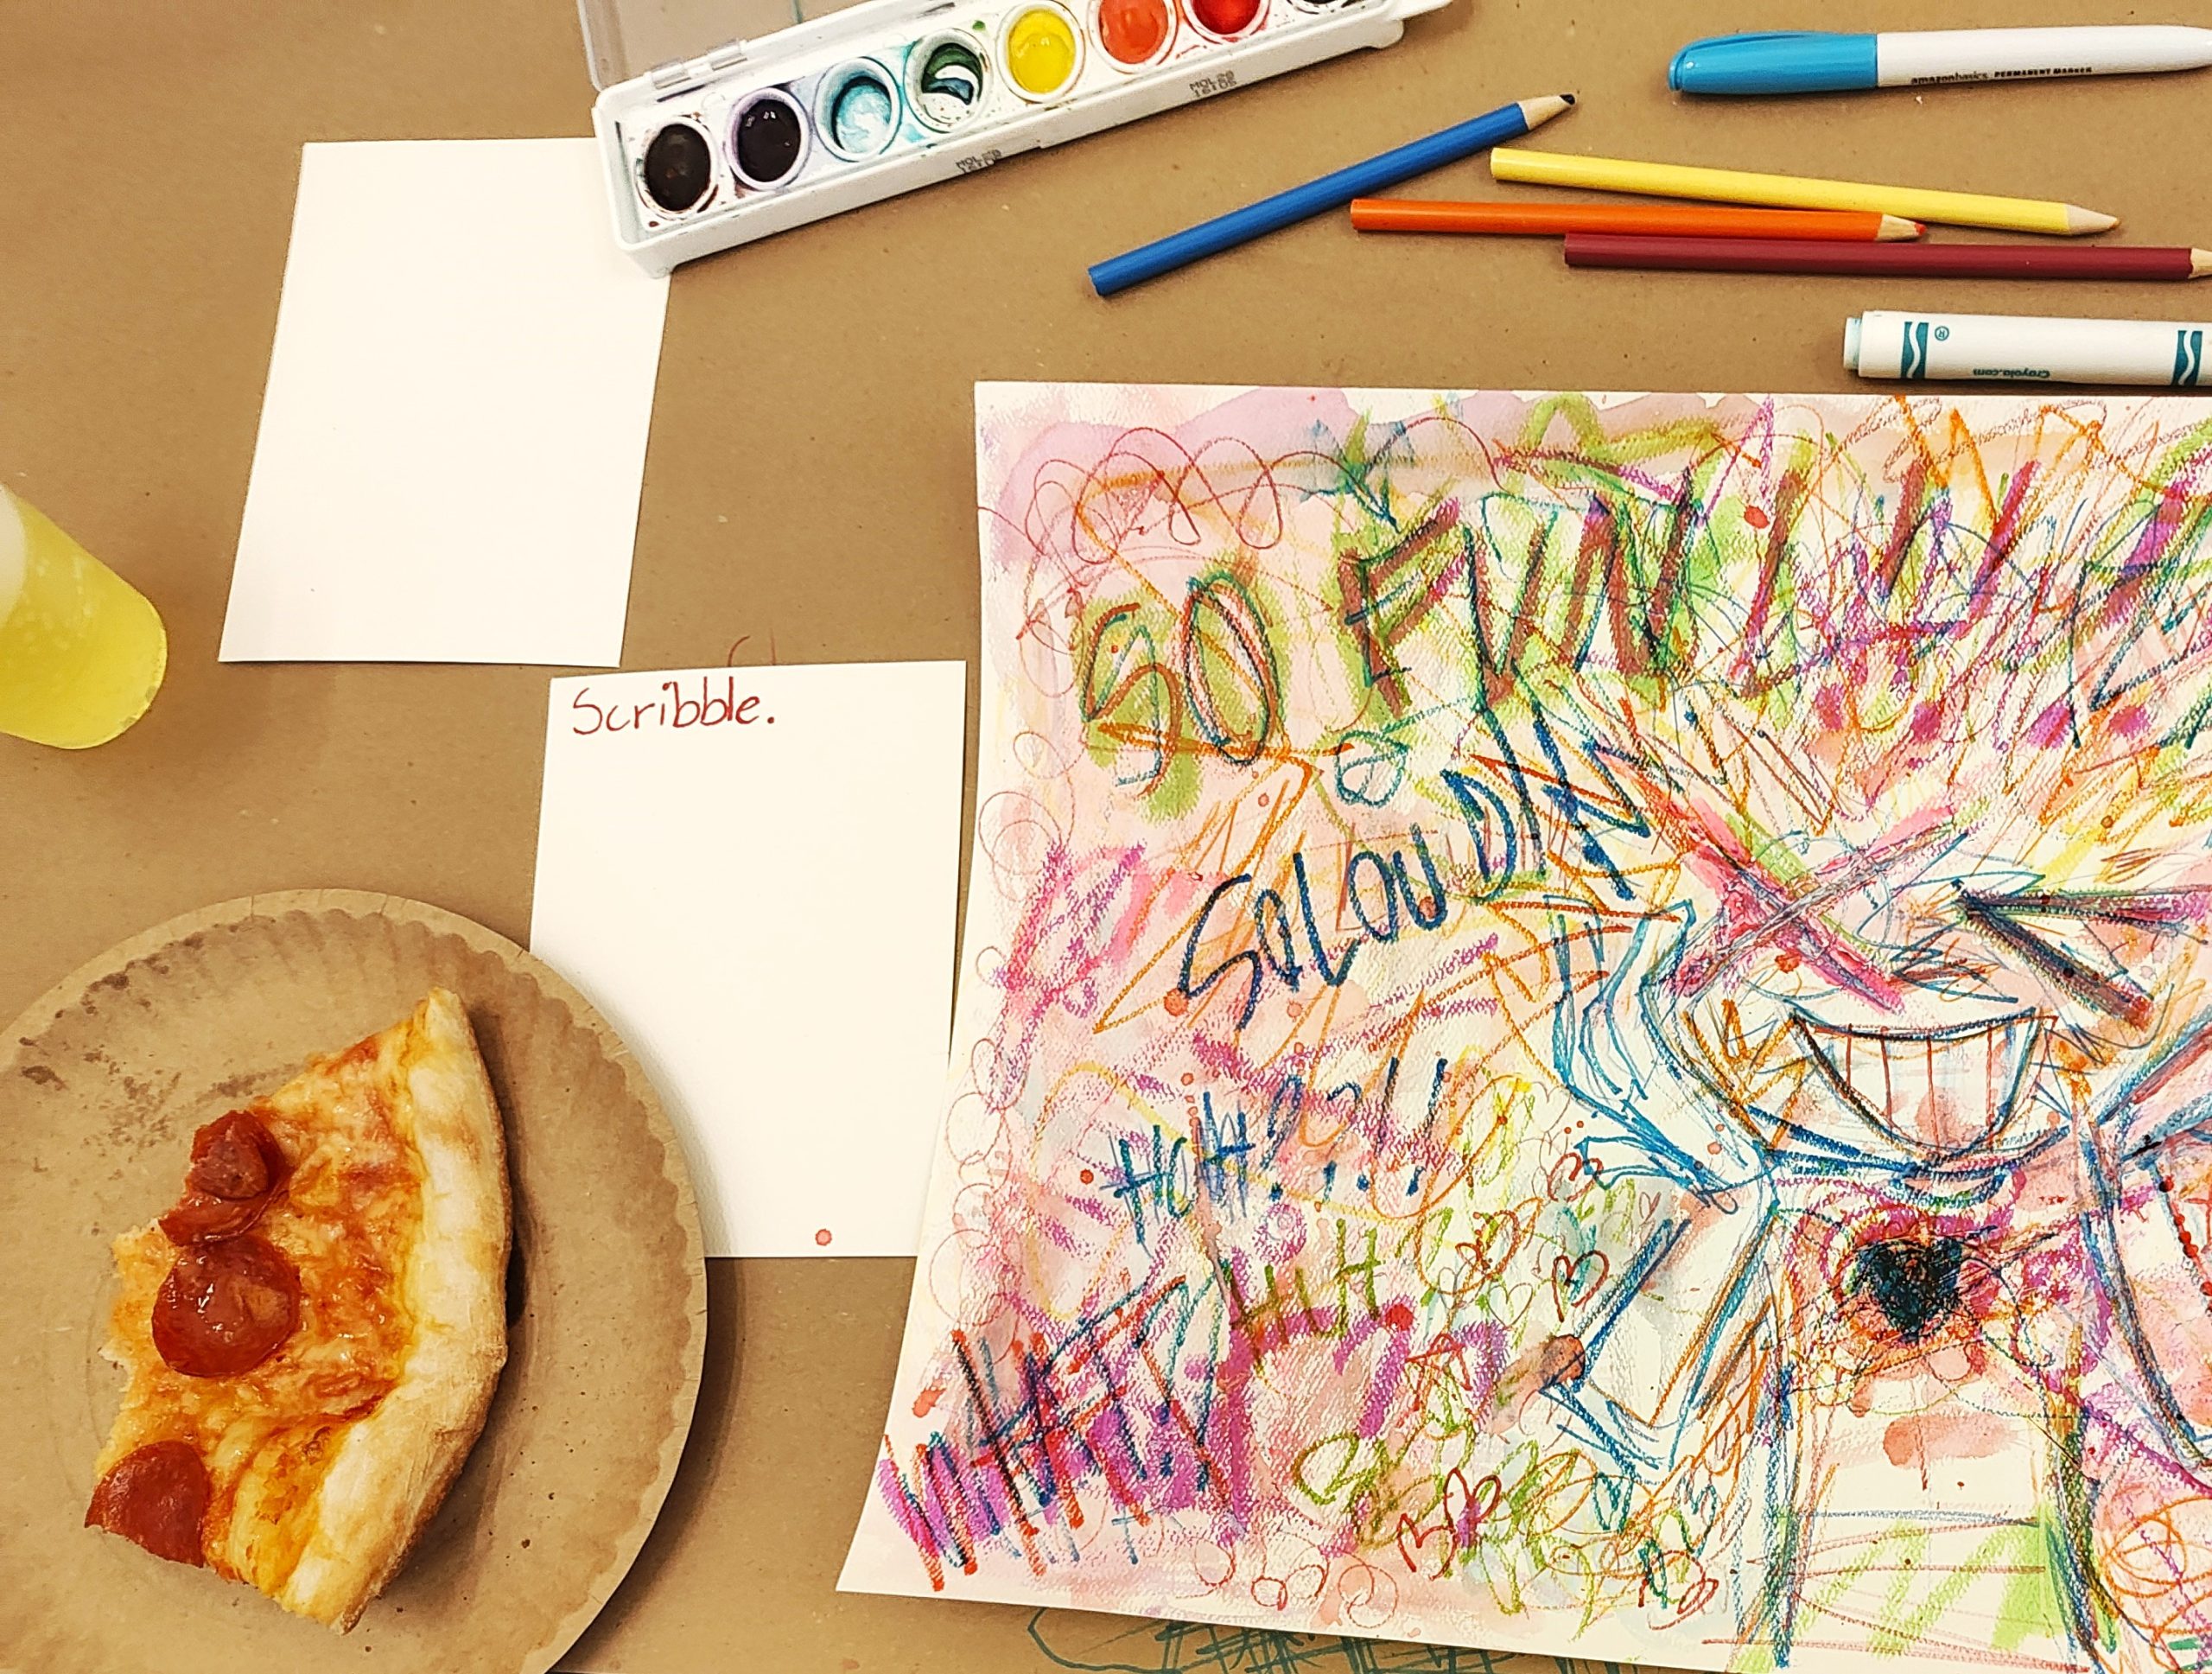 Pizza and a drawing